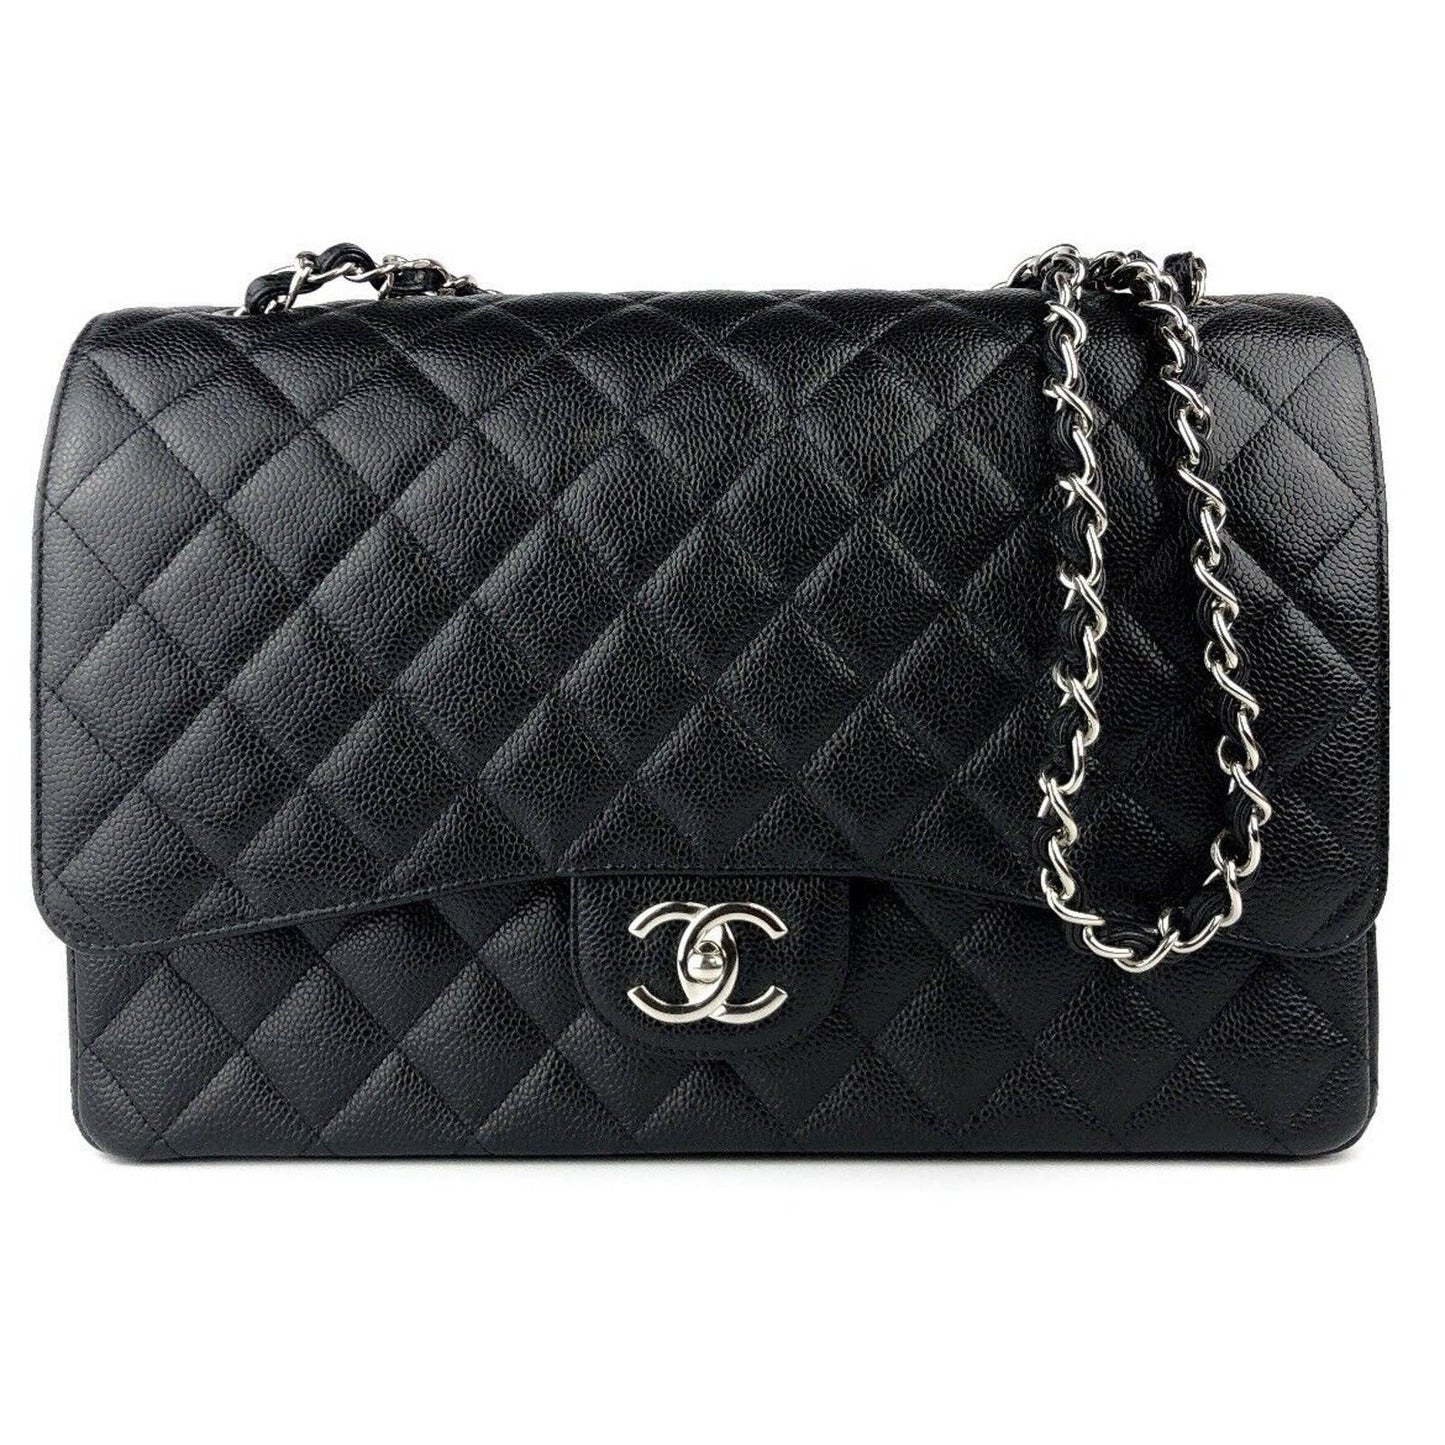 CHANEL Classic Maxi Double Flap Bag Black Caviar Leather Silver Hardware